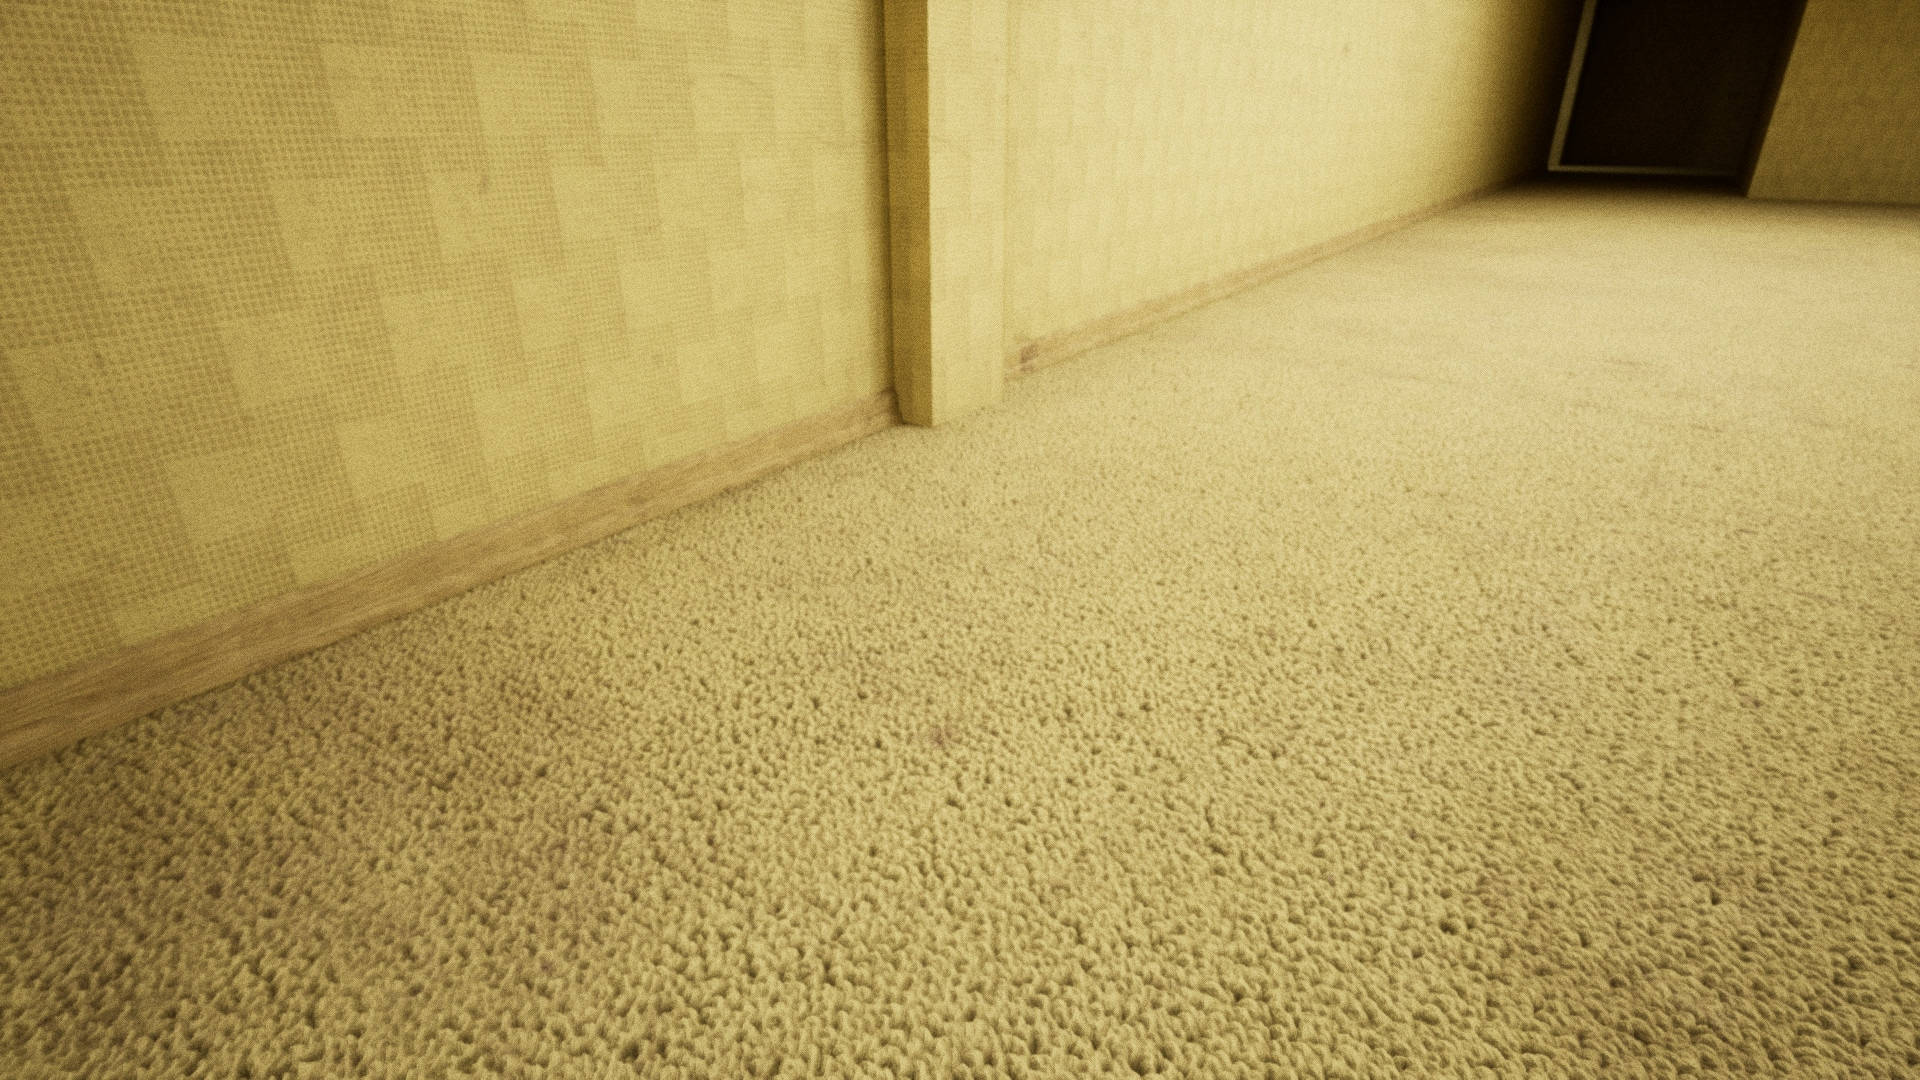 A Hallway With Carpet And A Door Wallpaper